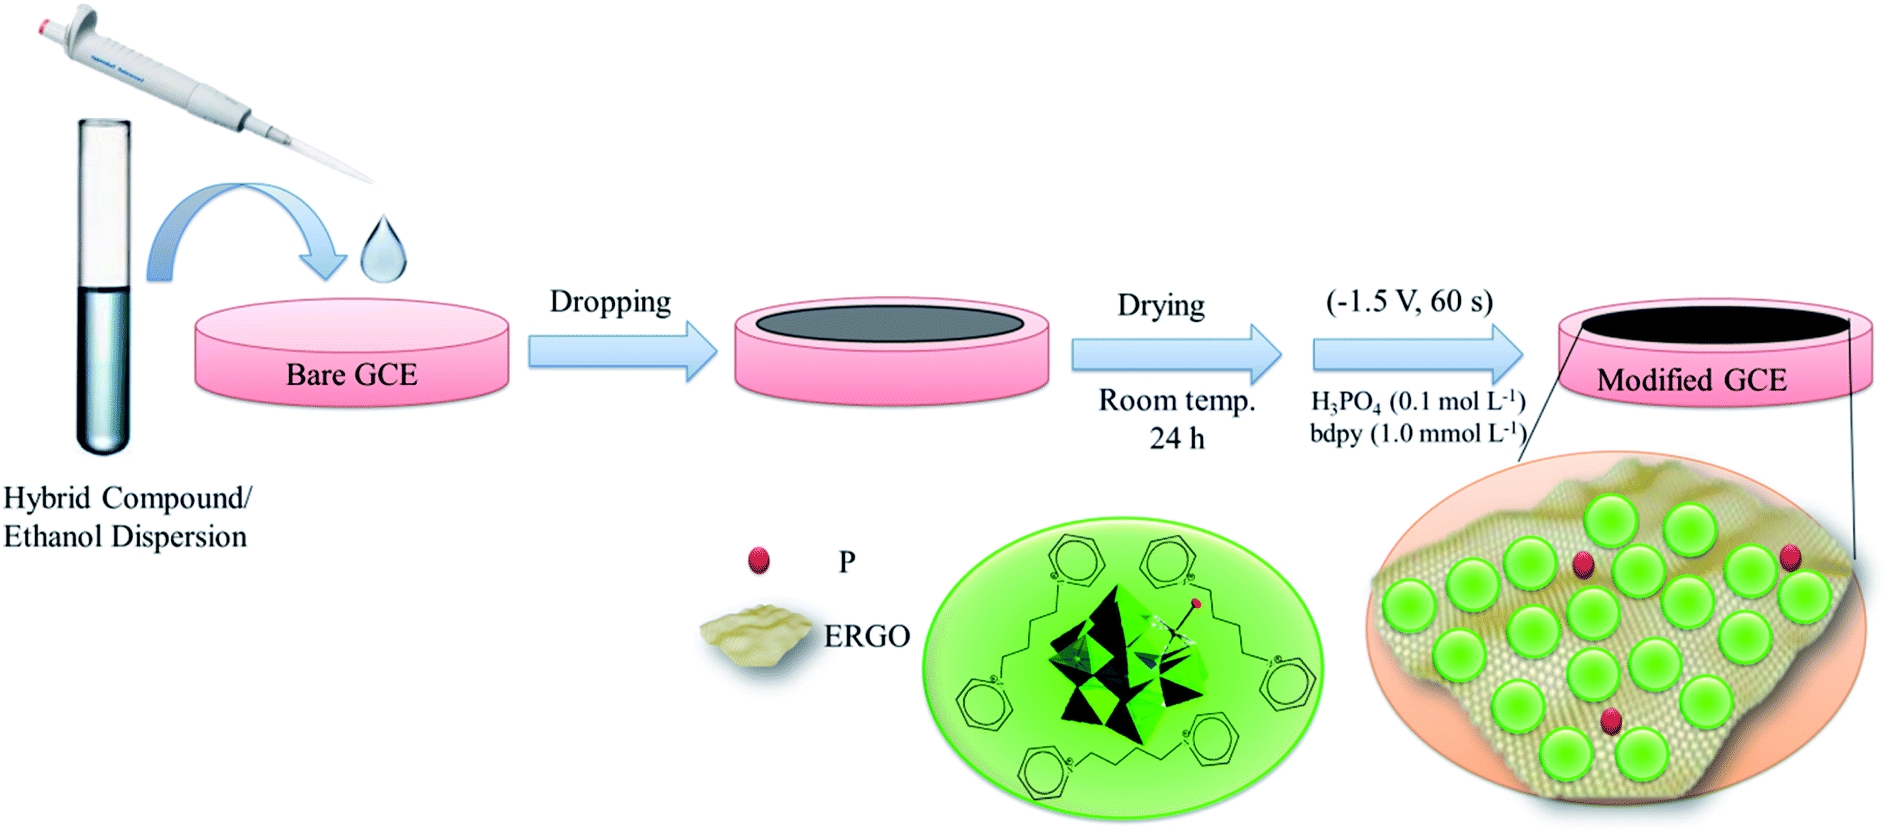 Electrochemical Investigation And Amperometry Determination Iodate Based On Ionic Liquid Polyoxotungstate P Doped Electrochemically Reduced Graphene Oxide Multi Component Nanocomposite Modified Glassy Carbon Electrode Rsc Advances Rsc Publishing